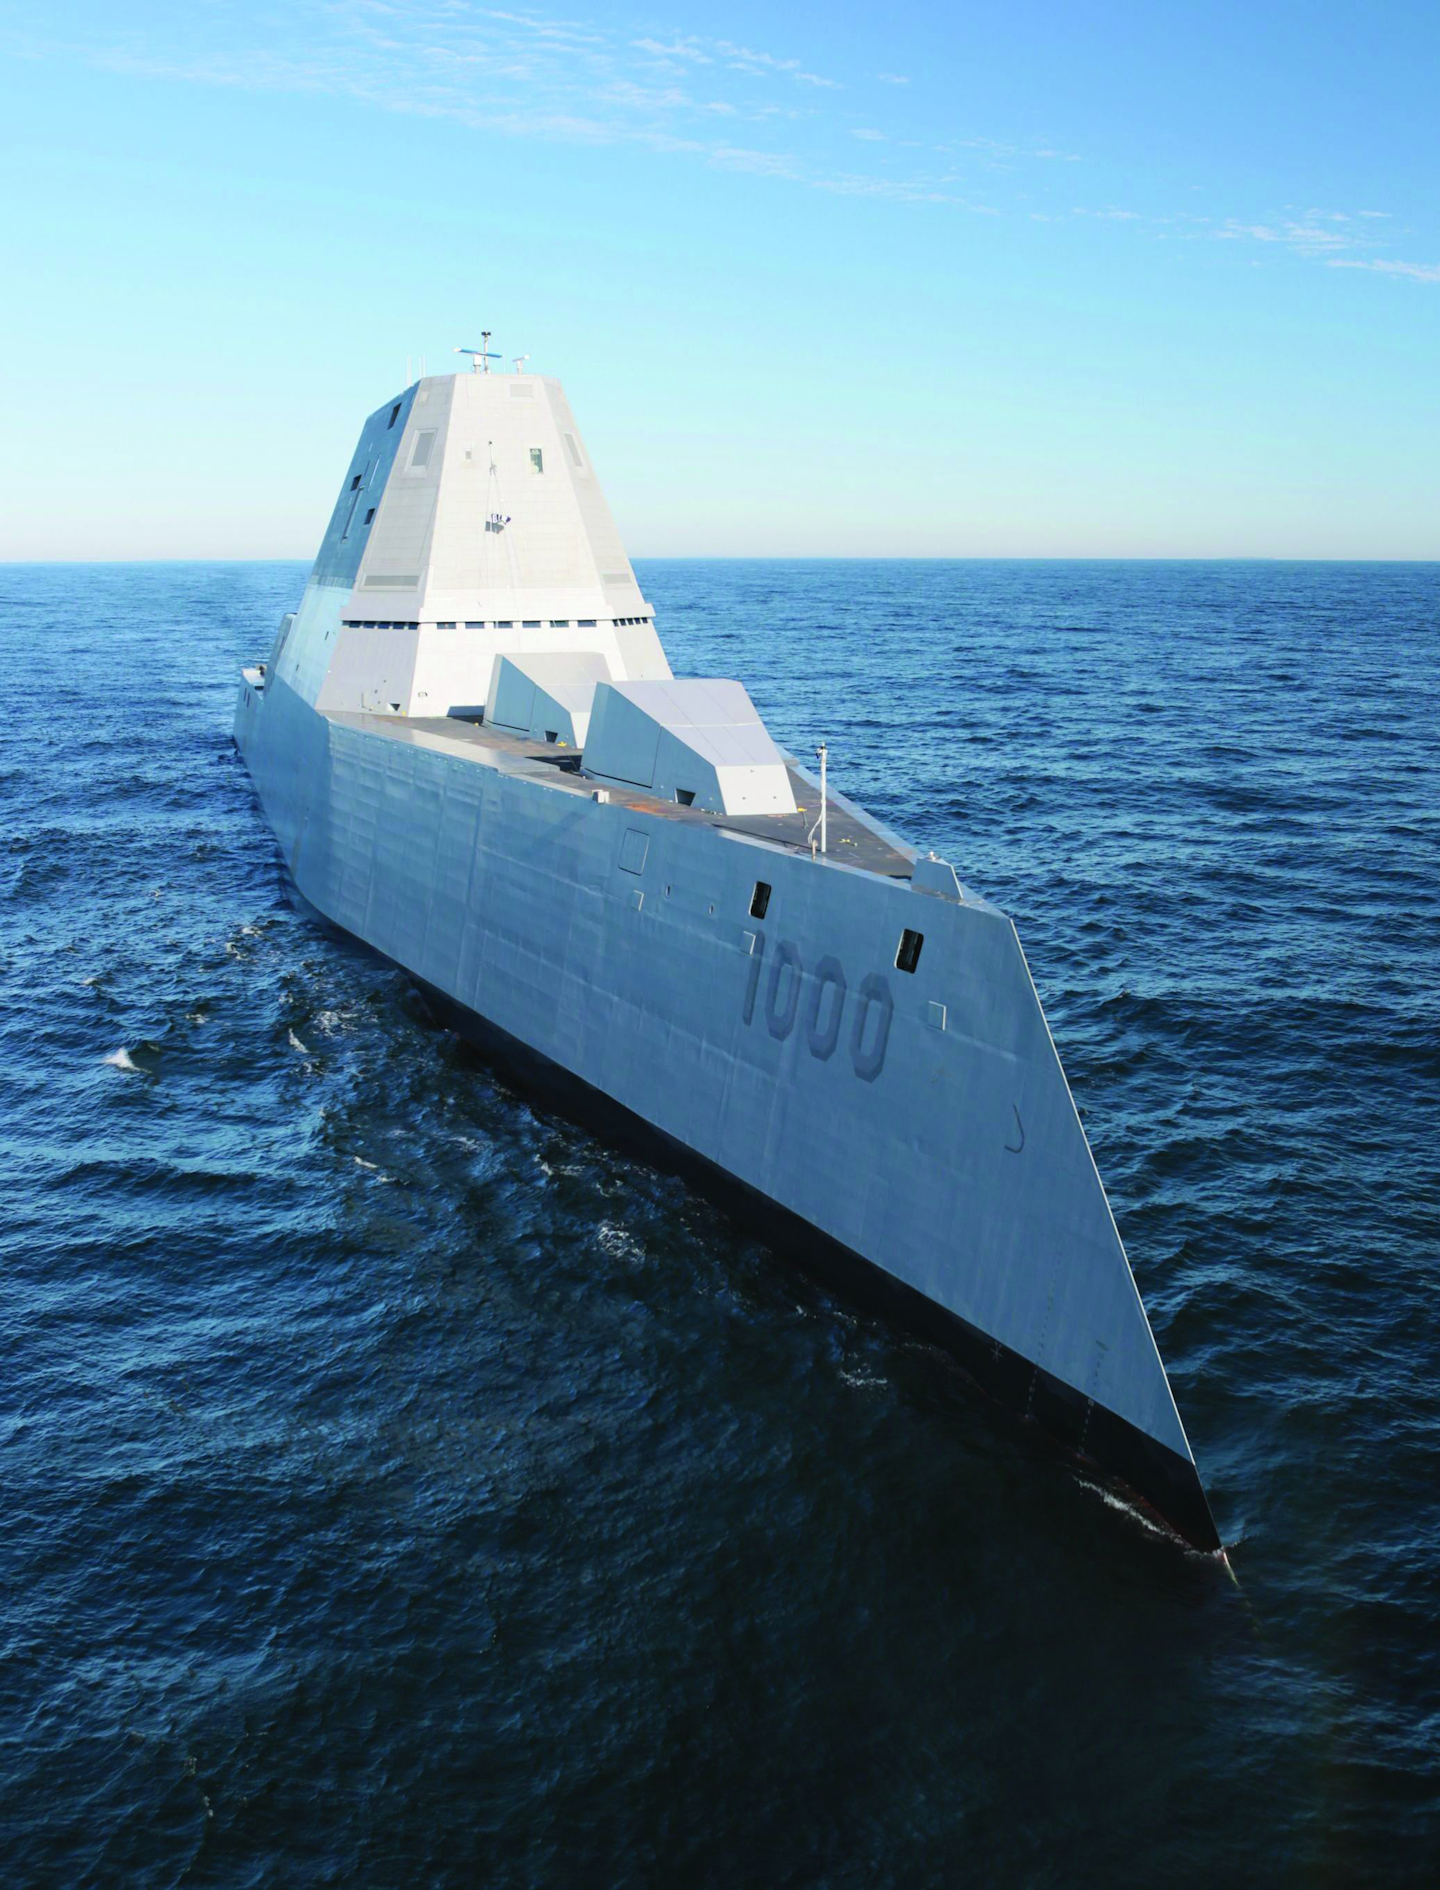 The three Zumwalt-class (DDG 1000) destroyers will be capable of anti-air and anti-land operations.